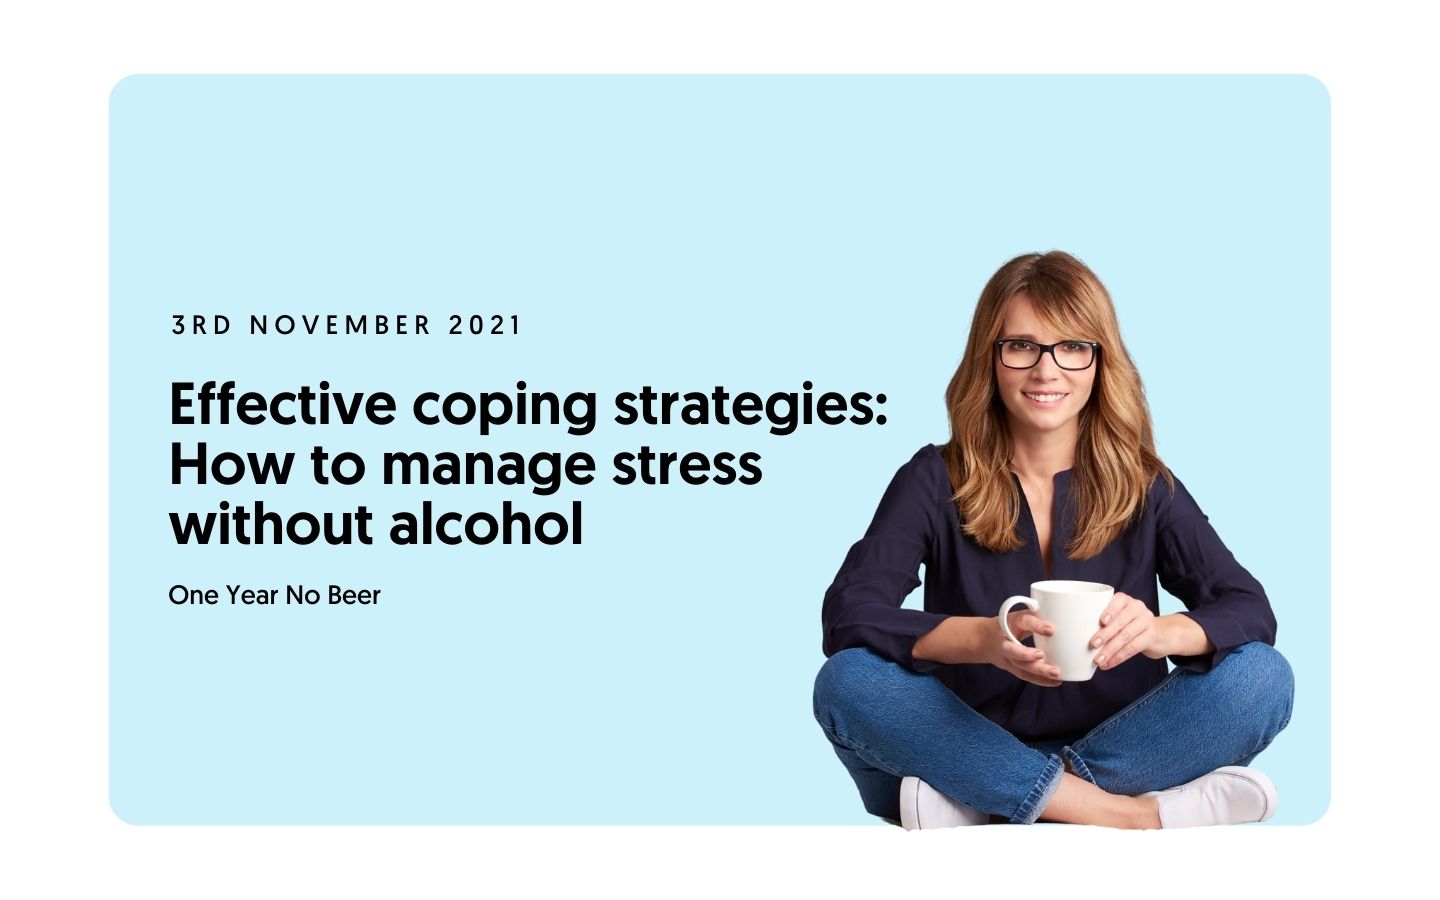 Effective coping strategies: How to manage stress without alcohol